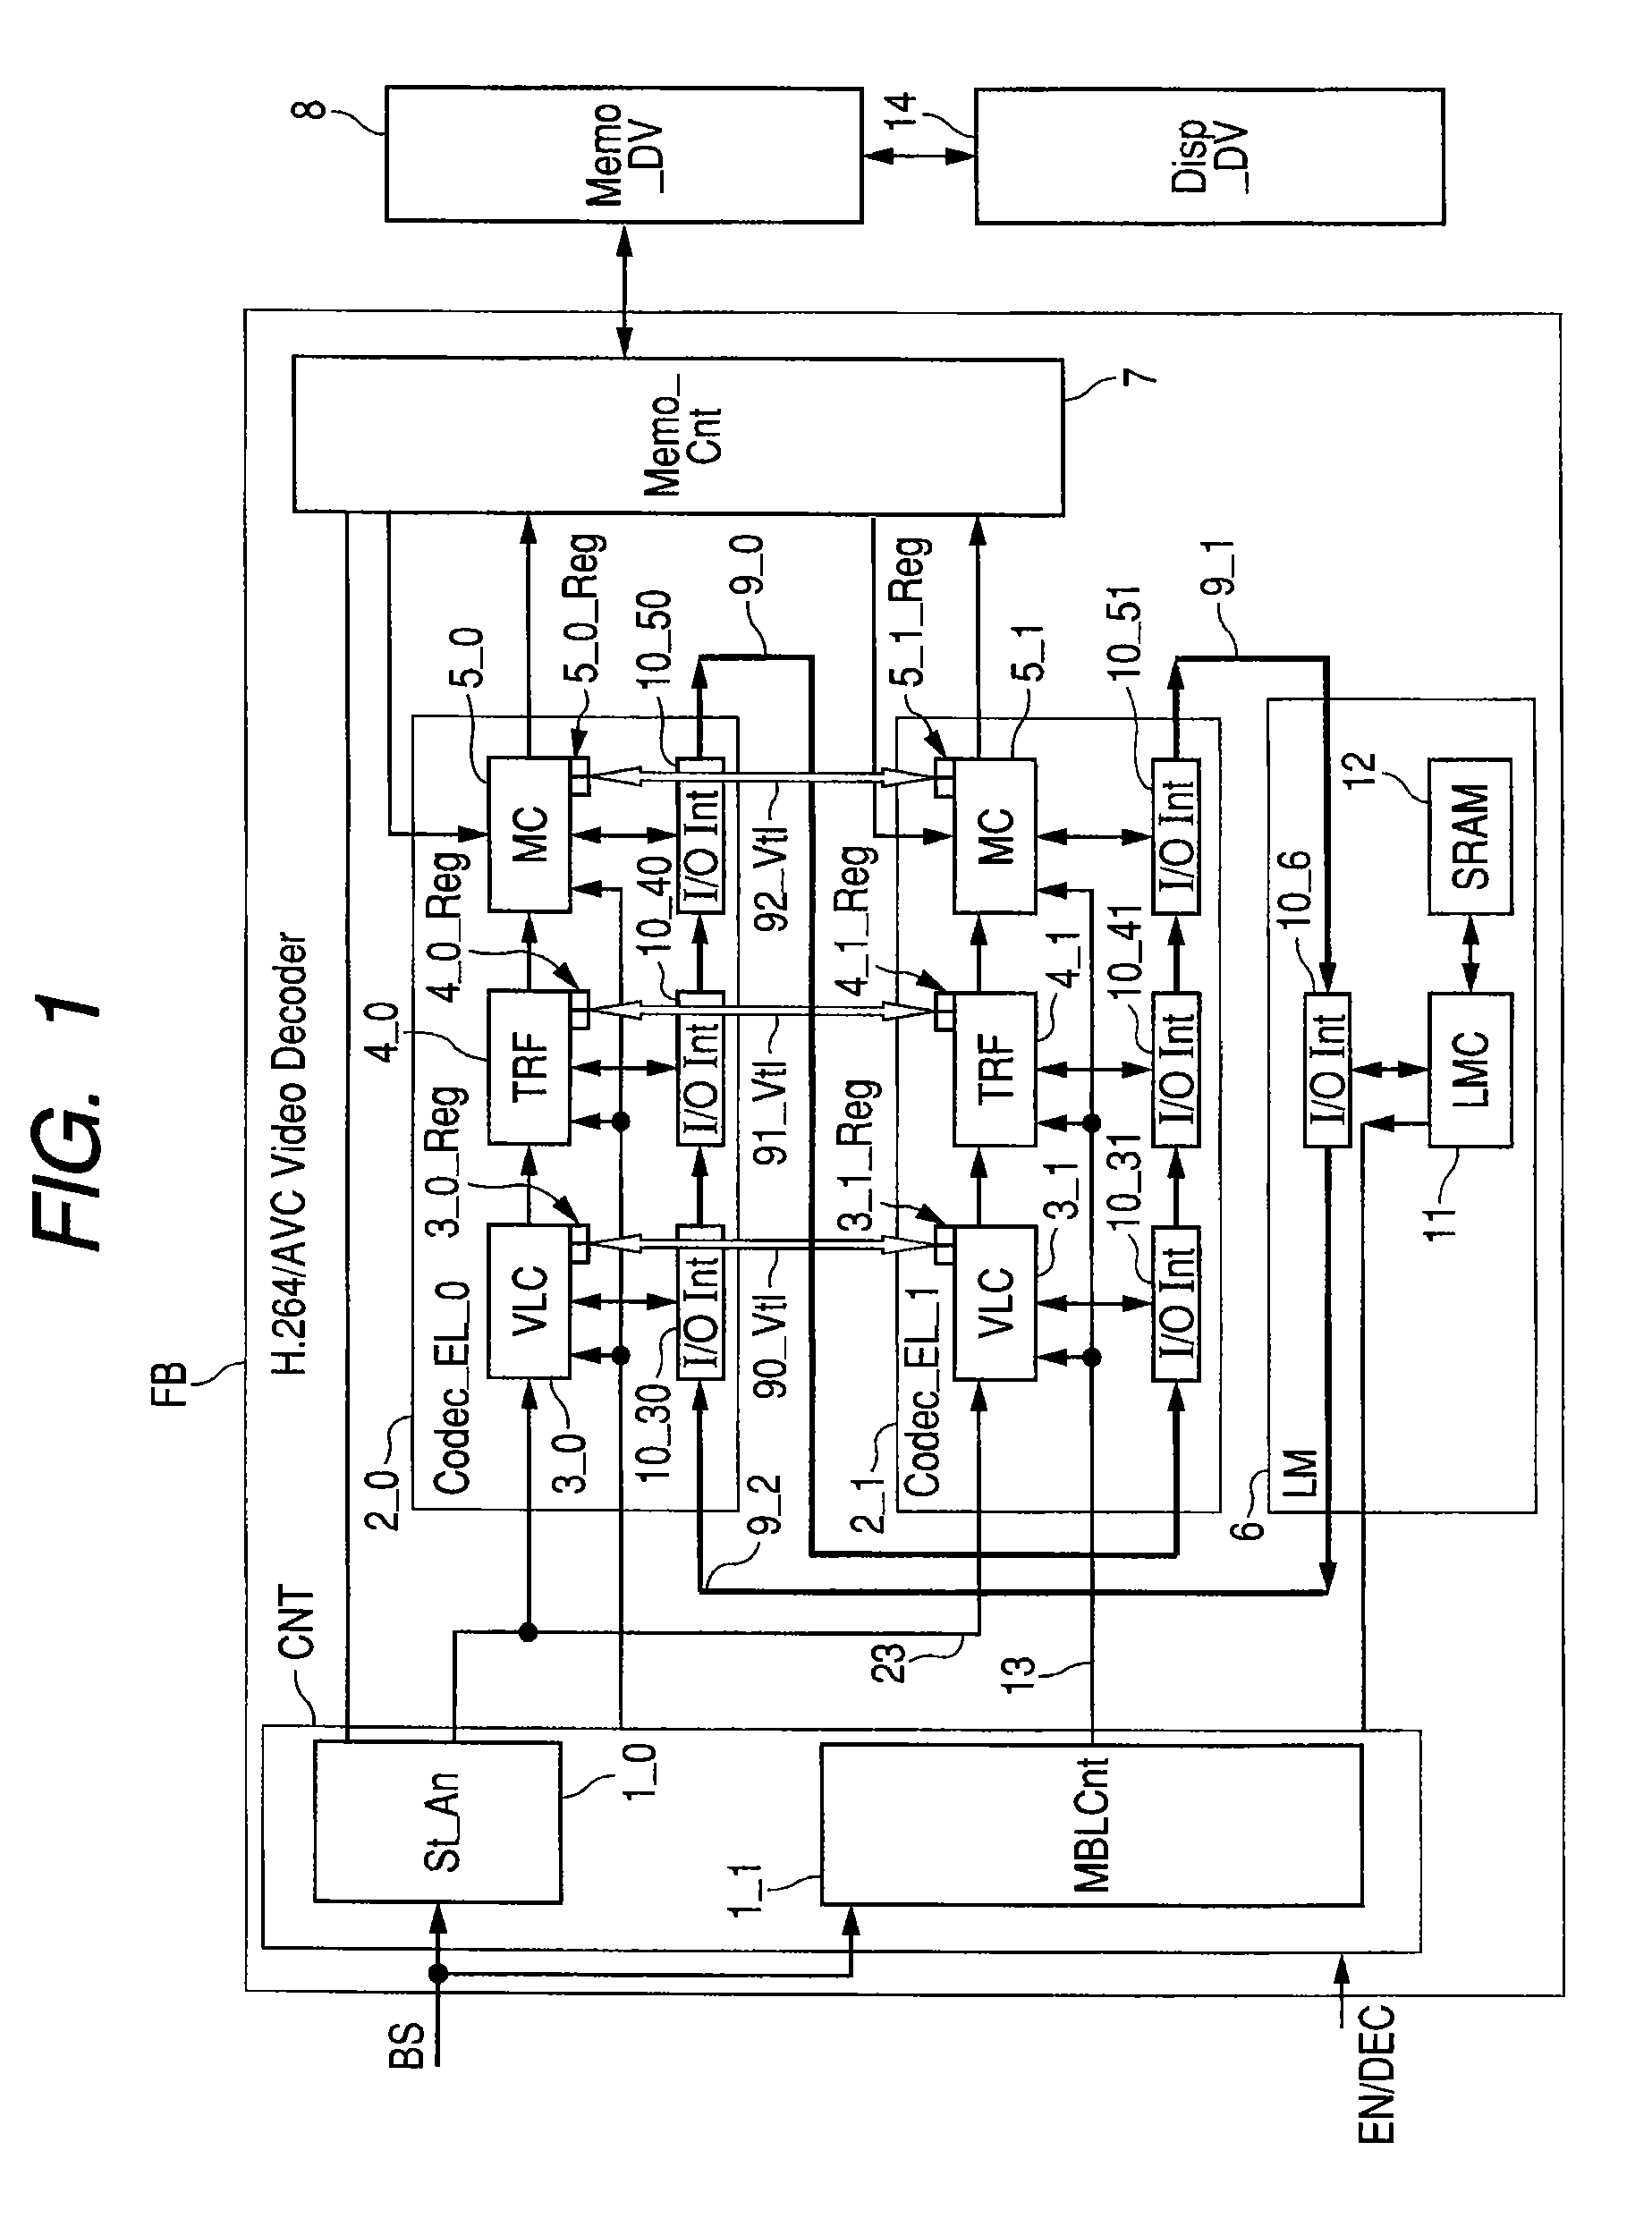 Parallel processing circuit for intra-frame prediction